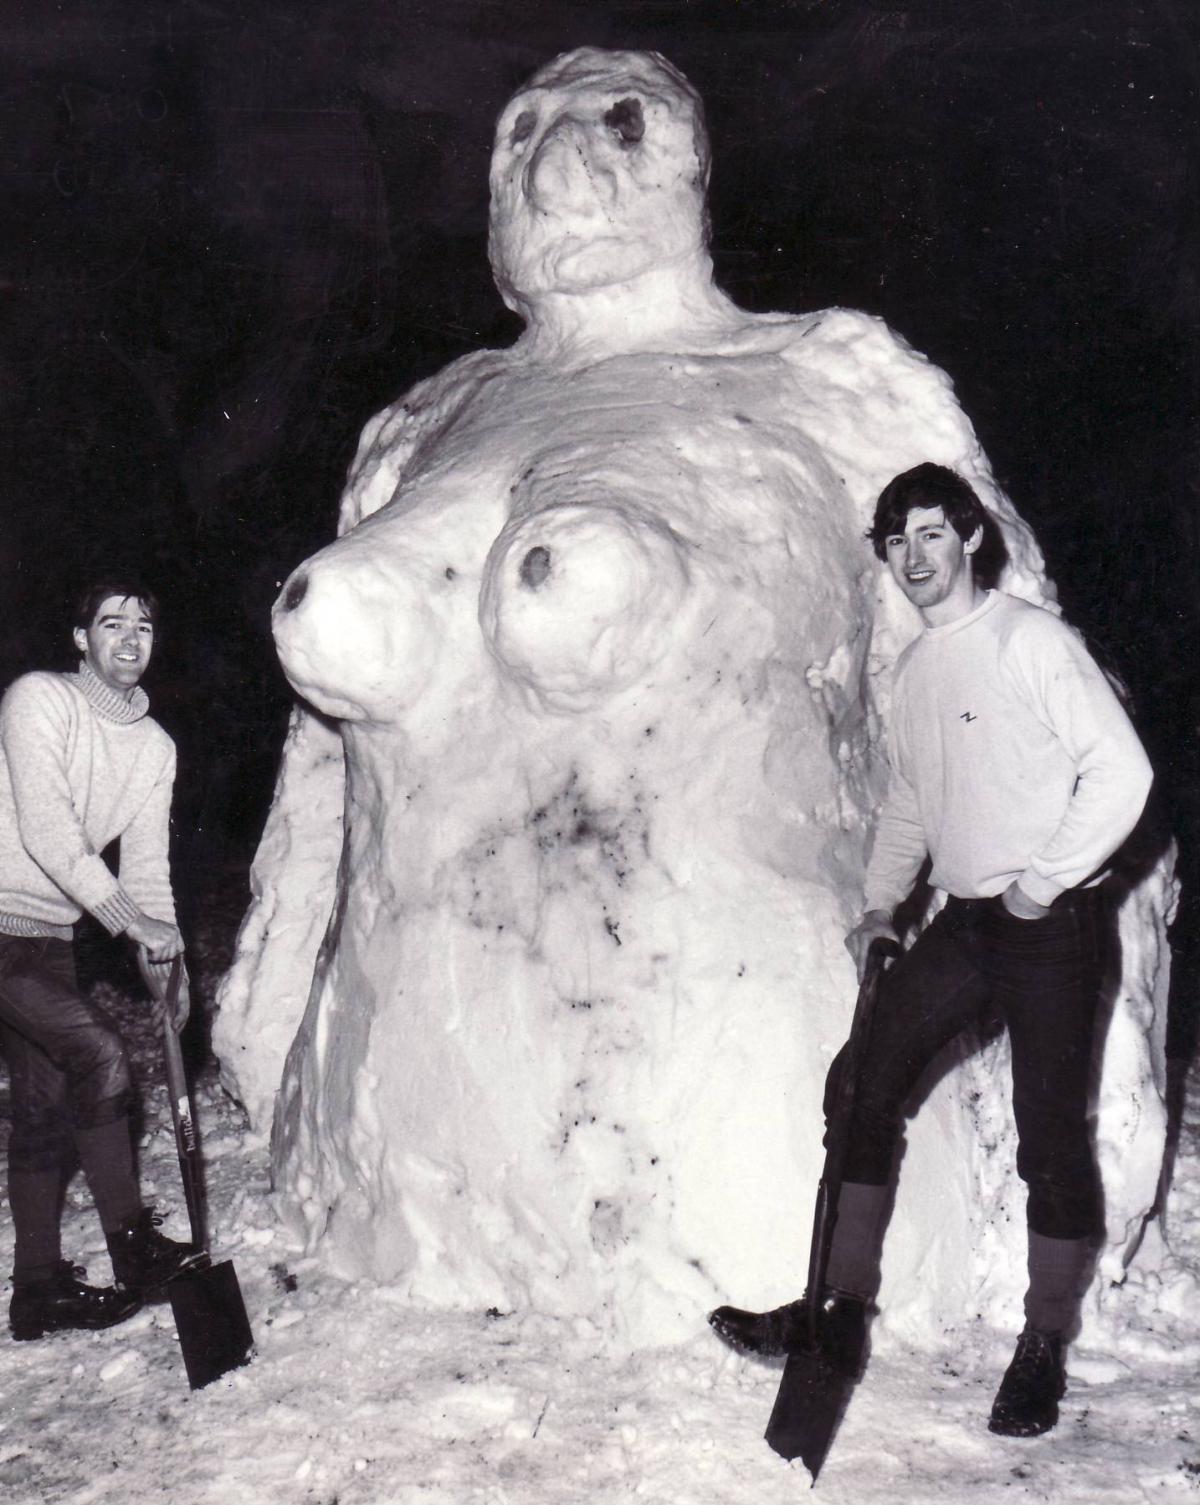 January 1984 - Dolly the snow woman made by brothers Alan (left) and Michael Owen in Westhoughton